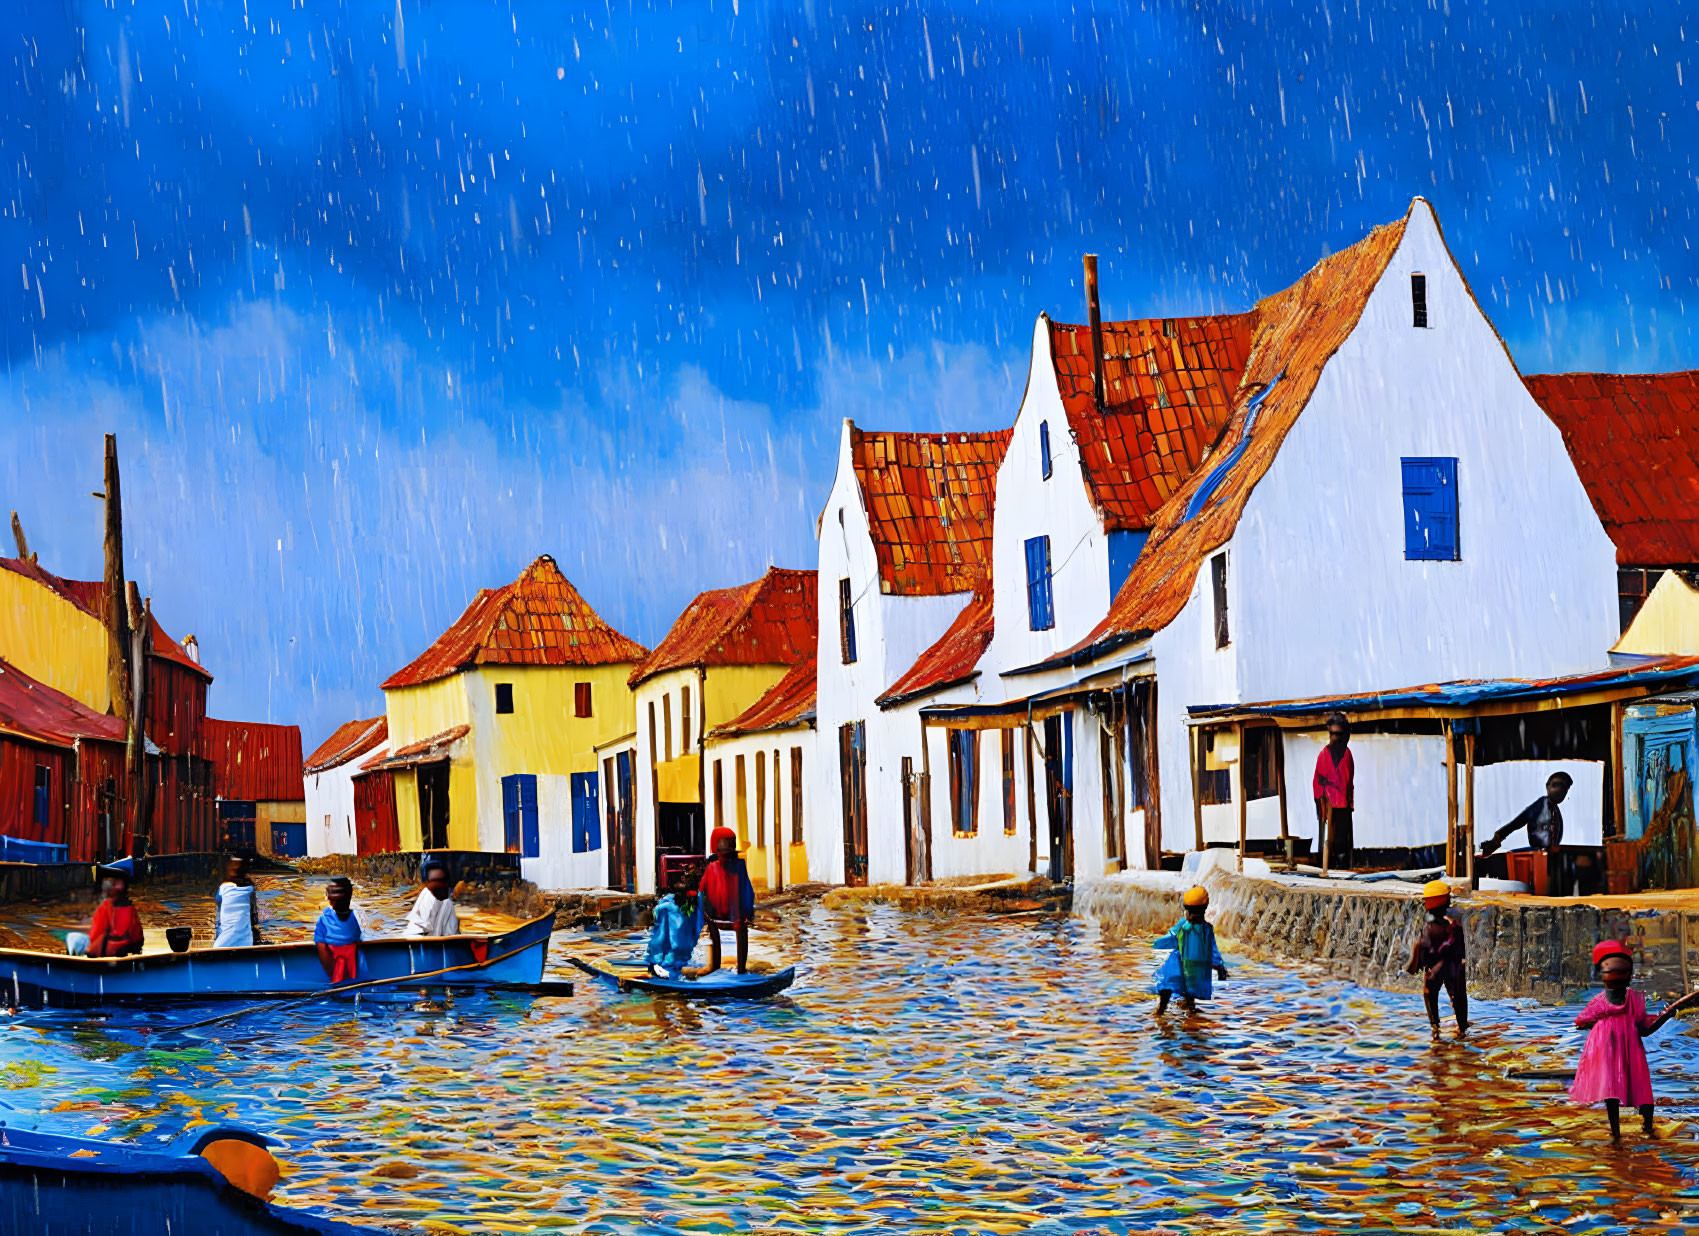 Vibrant waterfront village painting with European-style houses and people under rain